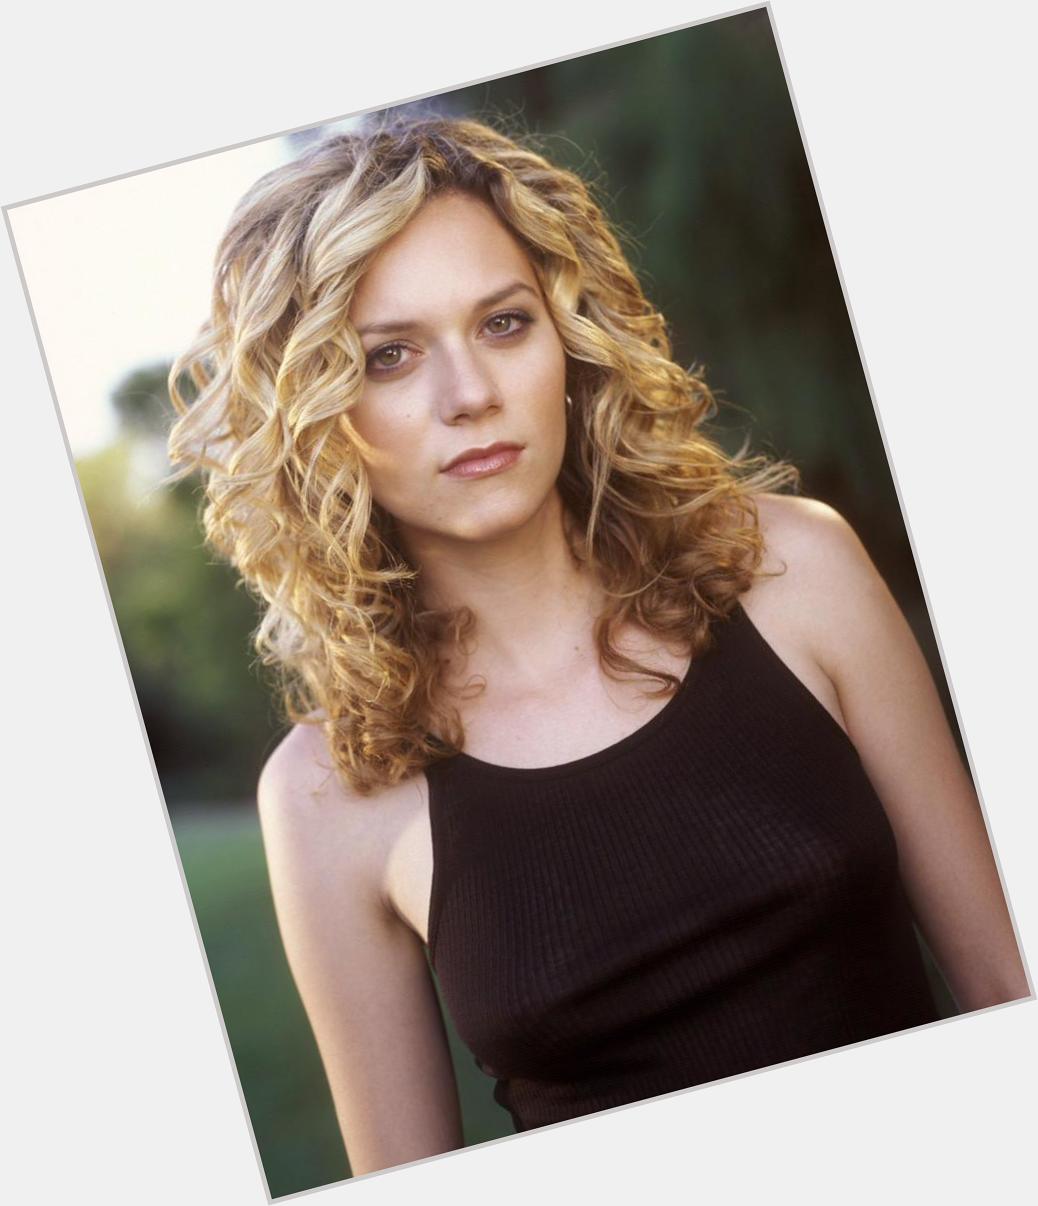 Shoutout to messageless hilarie burton, happy birthday i can\t wait to see you in august!! 